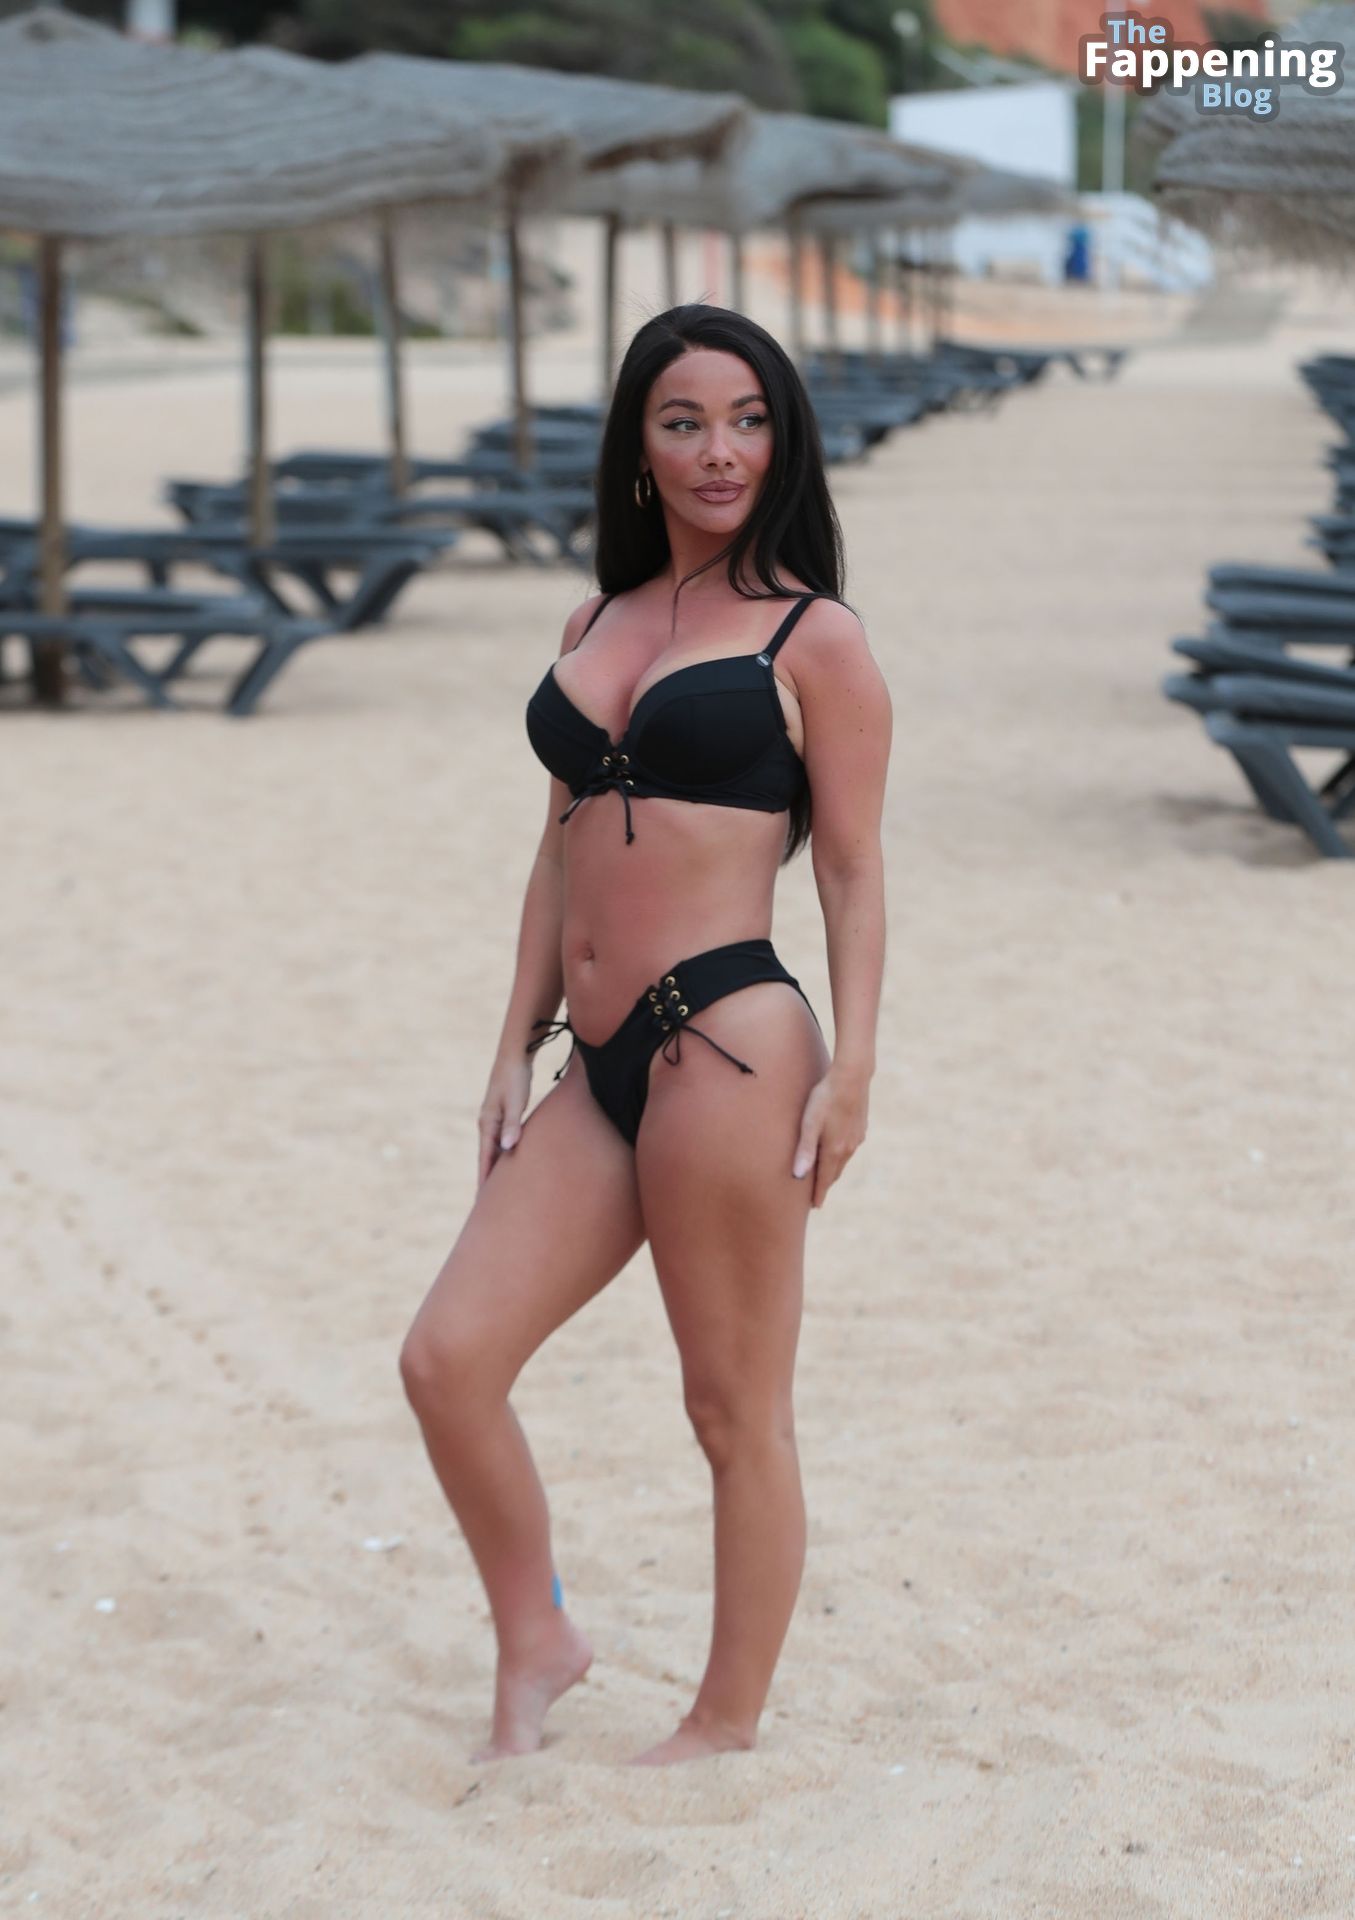 Chelsee-Healey-Sexy-Fappening-Blog-13.jpg